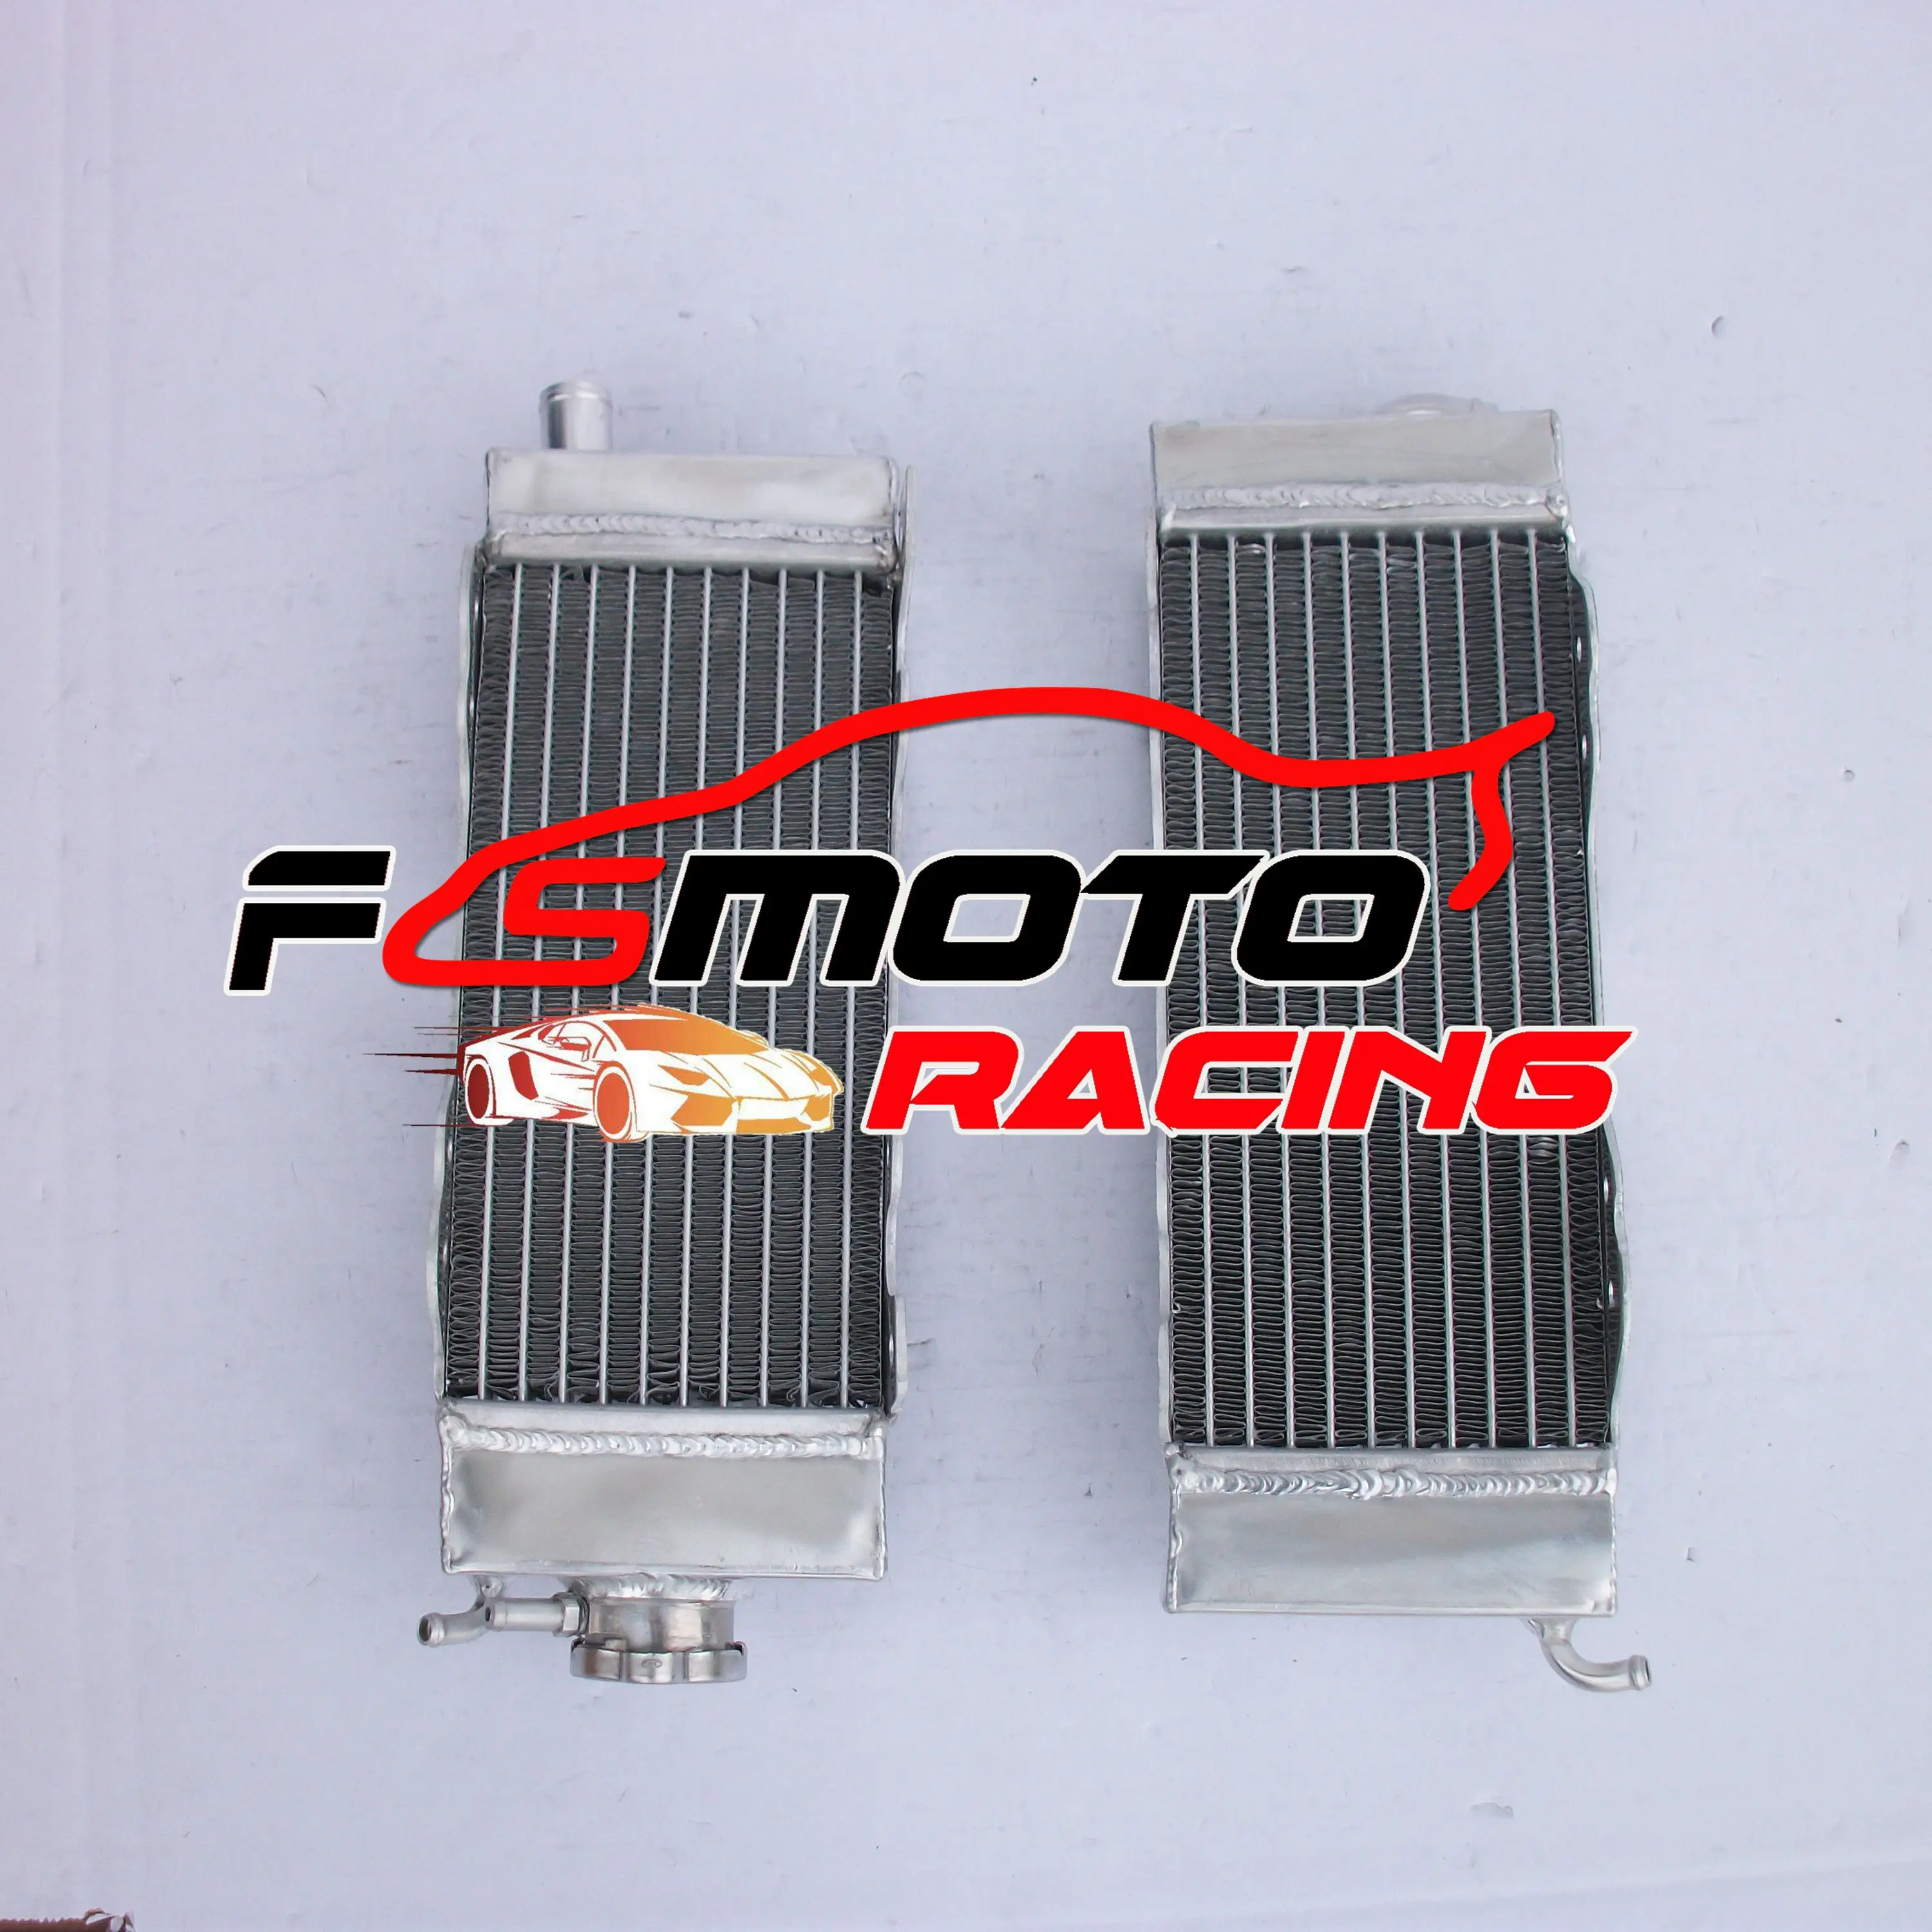 

Motocycle Accessories Aluminum Intercooler Radiator Water Cooling For Yamaha YZ250 YZ125 YZ 125 250 1993 1994 1995 93 94 95